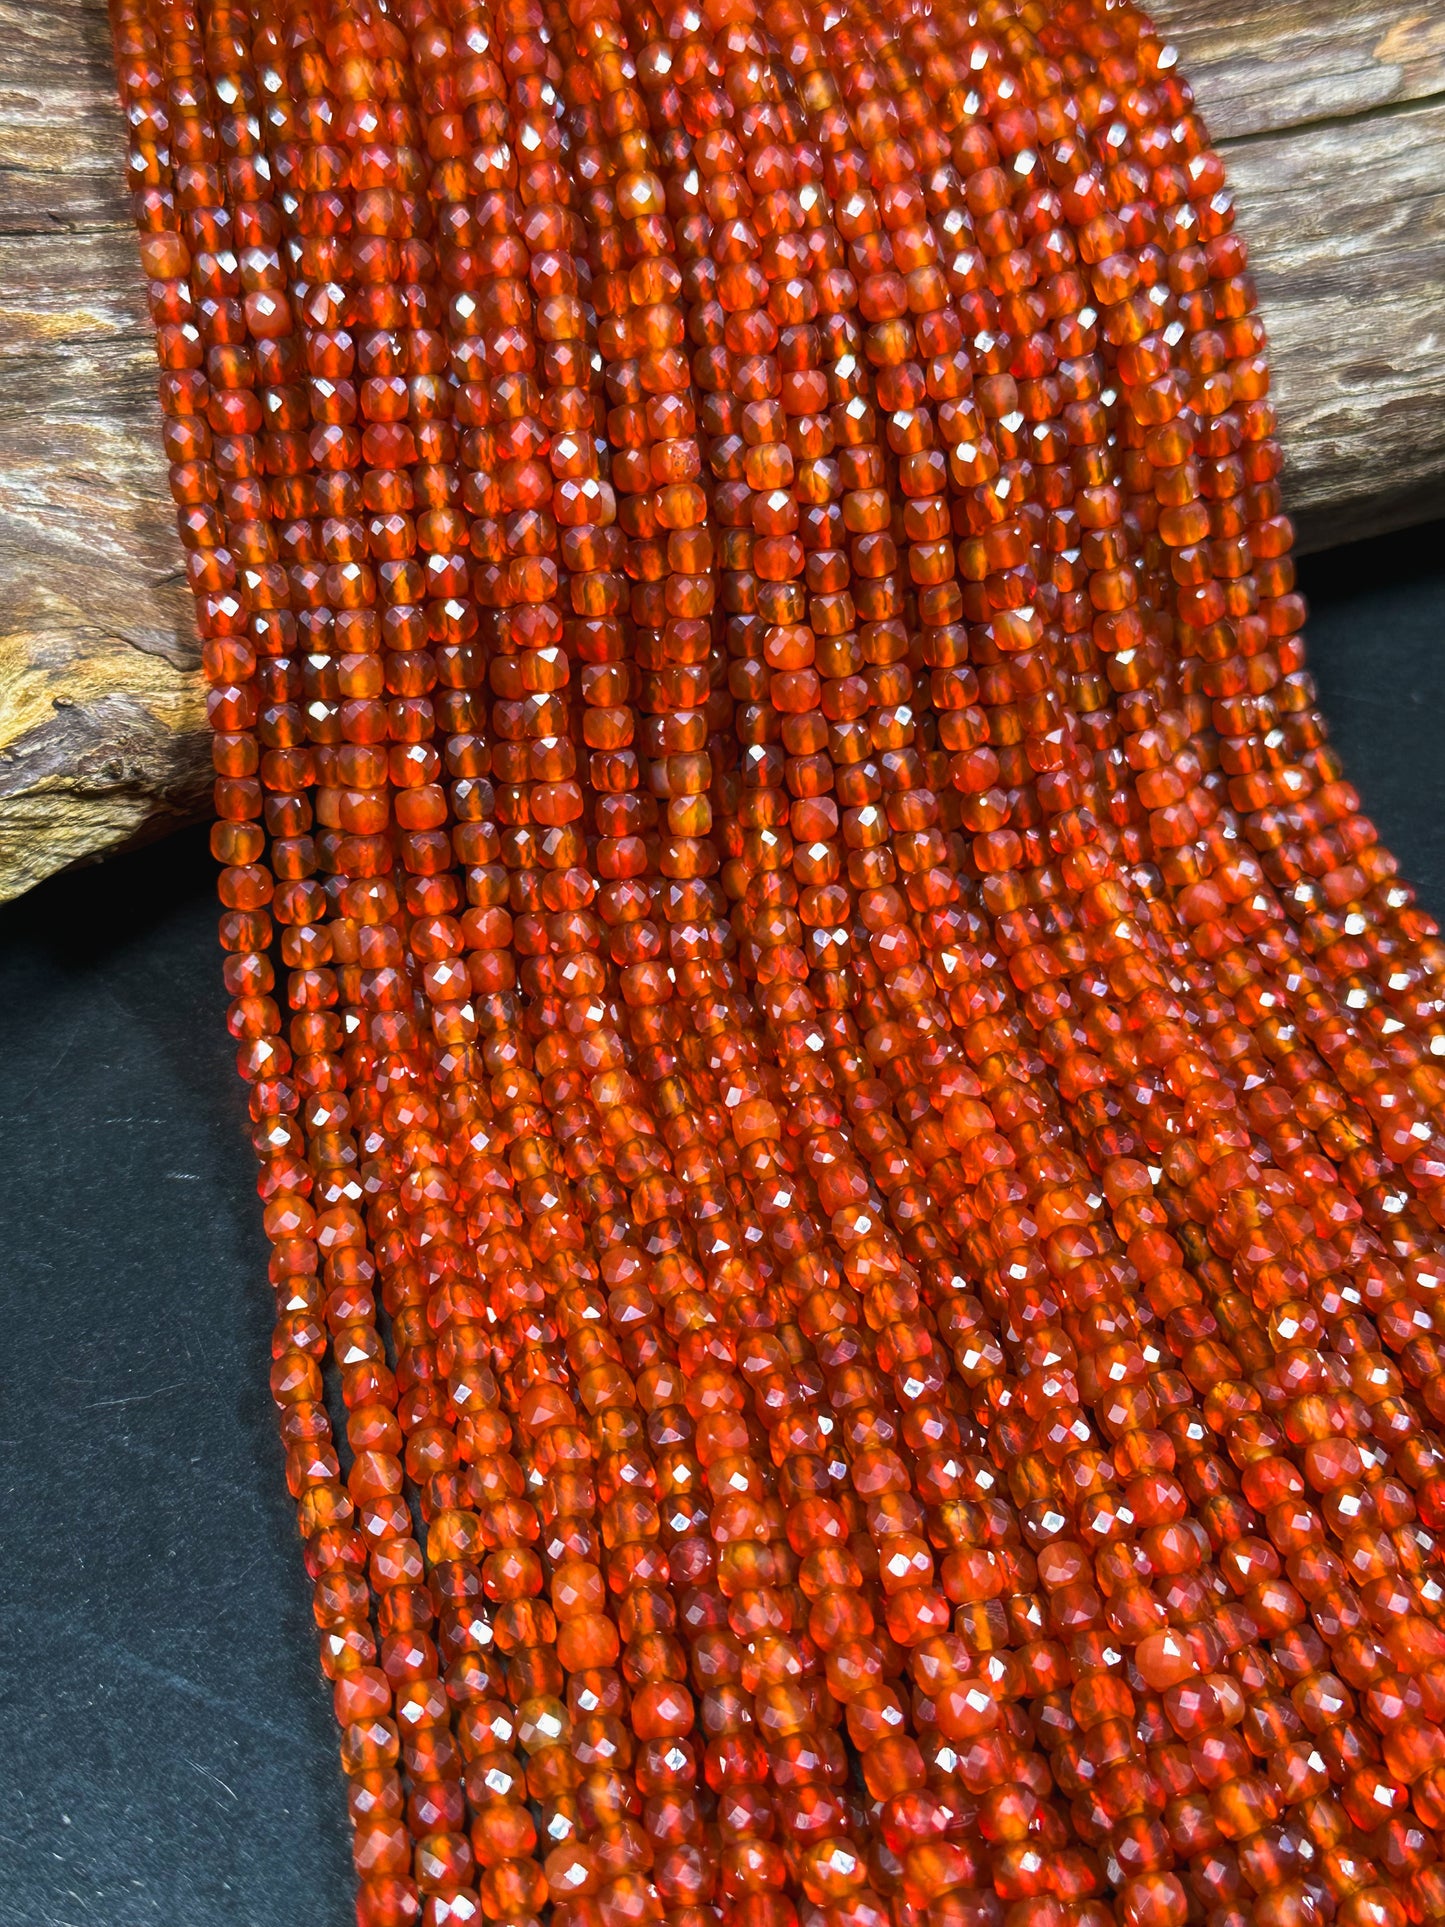 AAA Natural Carnelian Gemstone Bead Faceted 4mm Cube Shape Bead, Beautiful Natural Red Orange Color Carnelian Stone Beads Full Strand 15.5"